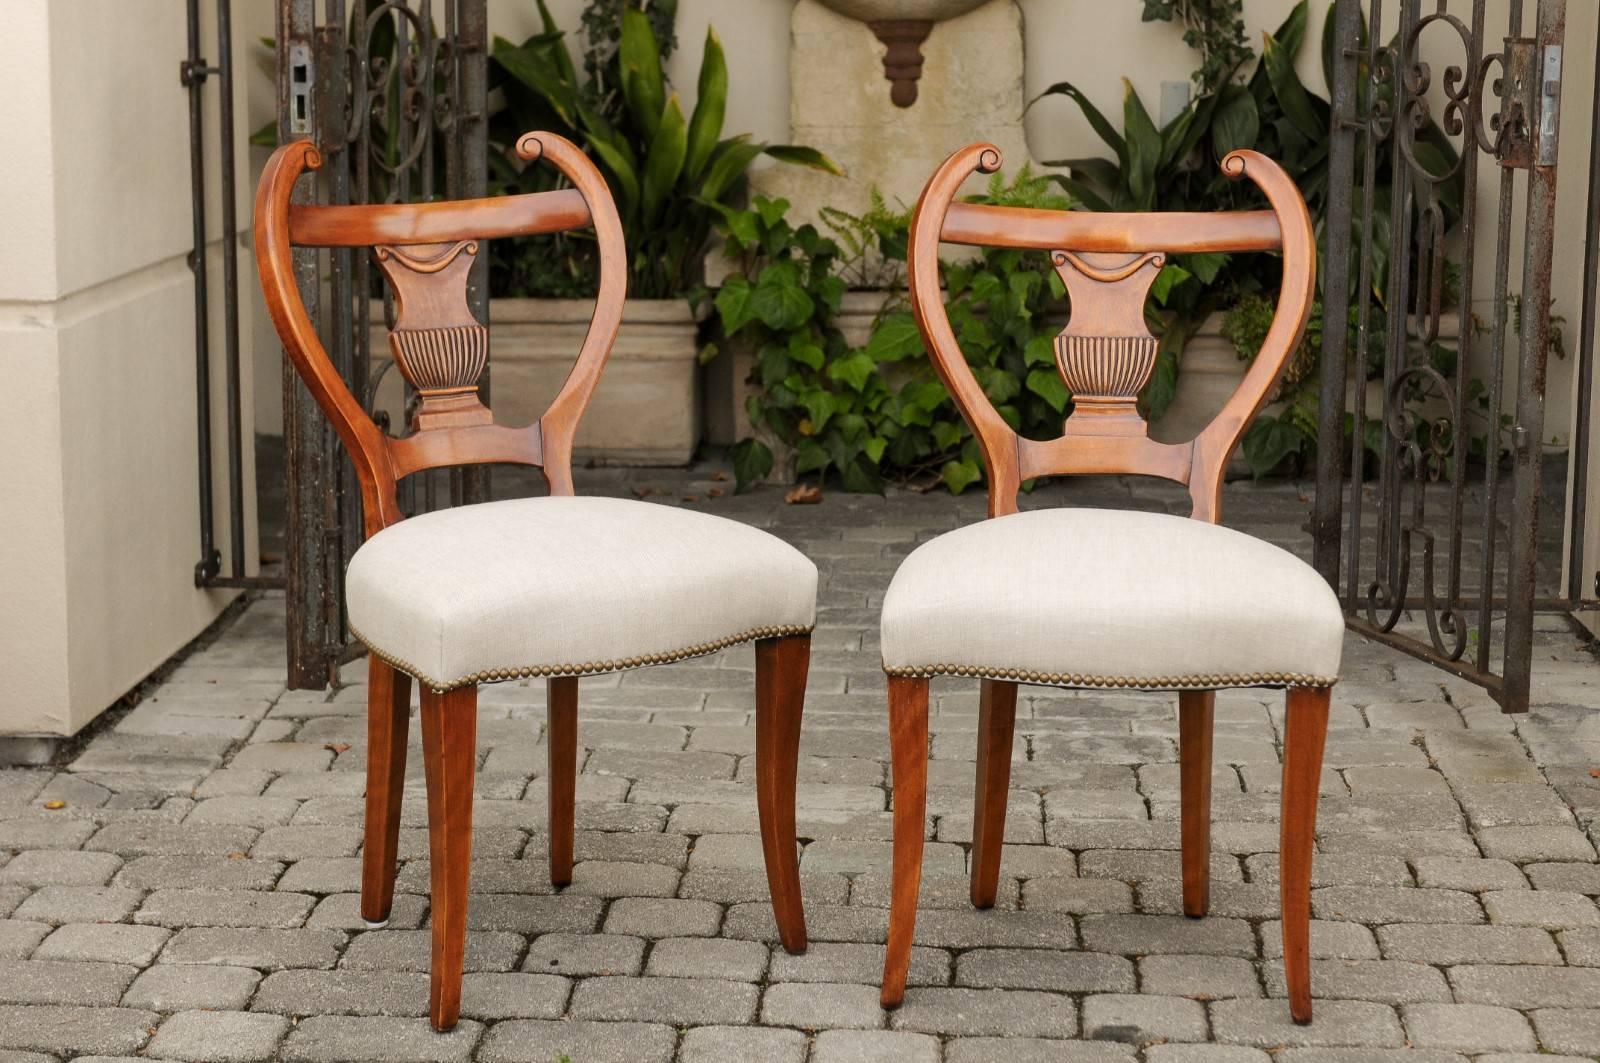 A set of four Austrian Biedermeier dining chairs from the mid-19th century, with lyre-shaped backs, carved urns and new upholstery. Each of this set of Biedermeier side chairs features an exquisite lyre-shaped back, adorned with a carved splat